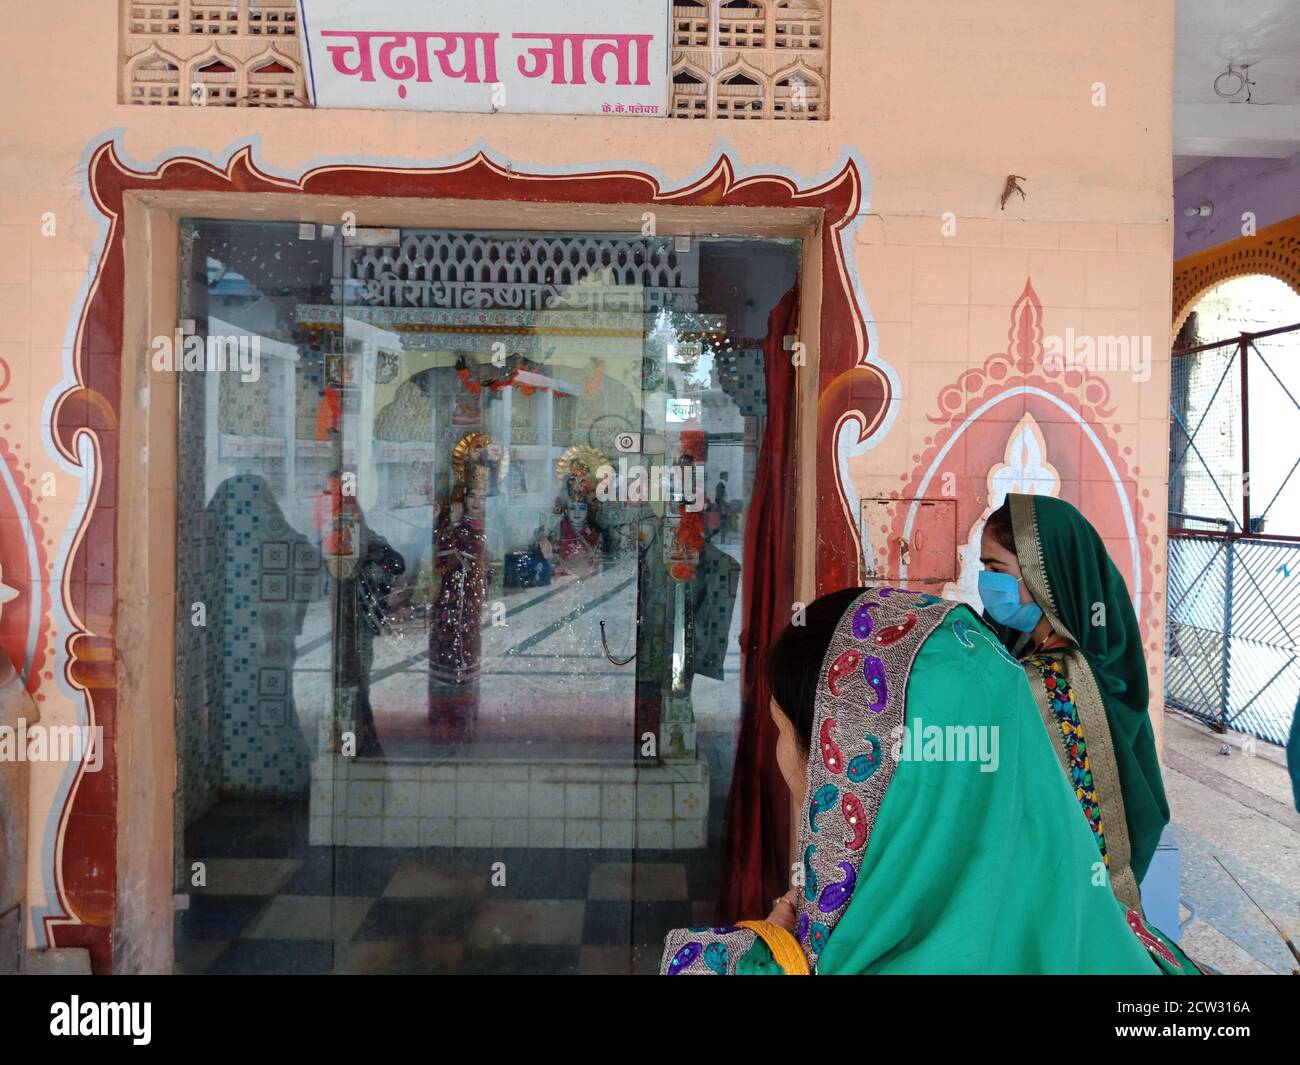 DISTRICT KATNI, INDIA - JULY 08, 2020: Indian traditional people worshiping at hindu religious place while travel. Stock Photo